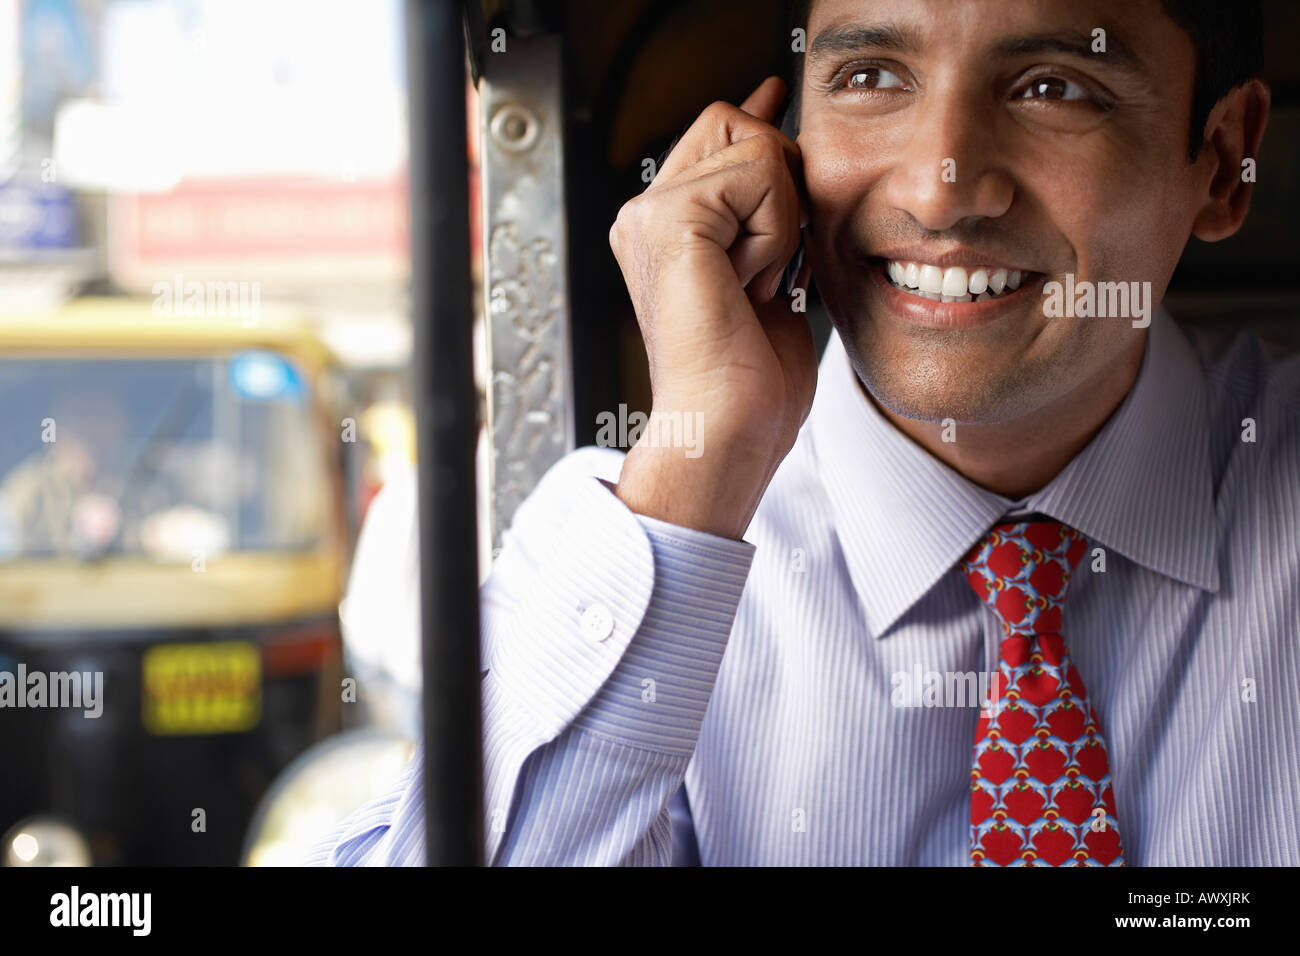 Business man using cell phone, smiling Stock Photo